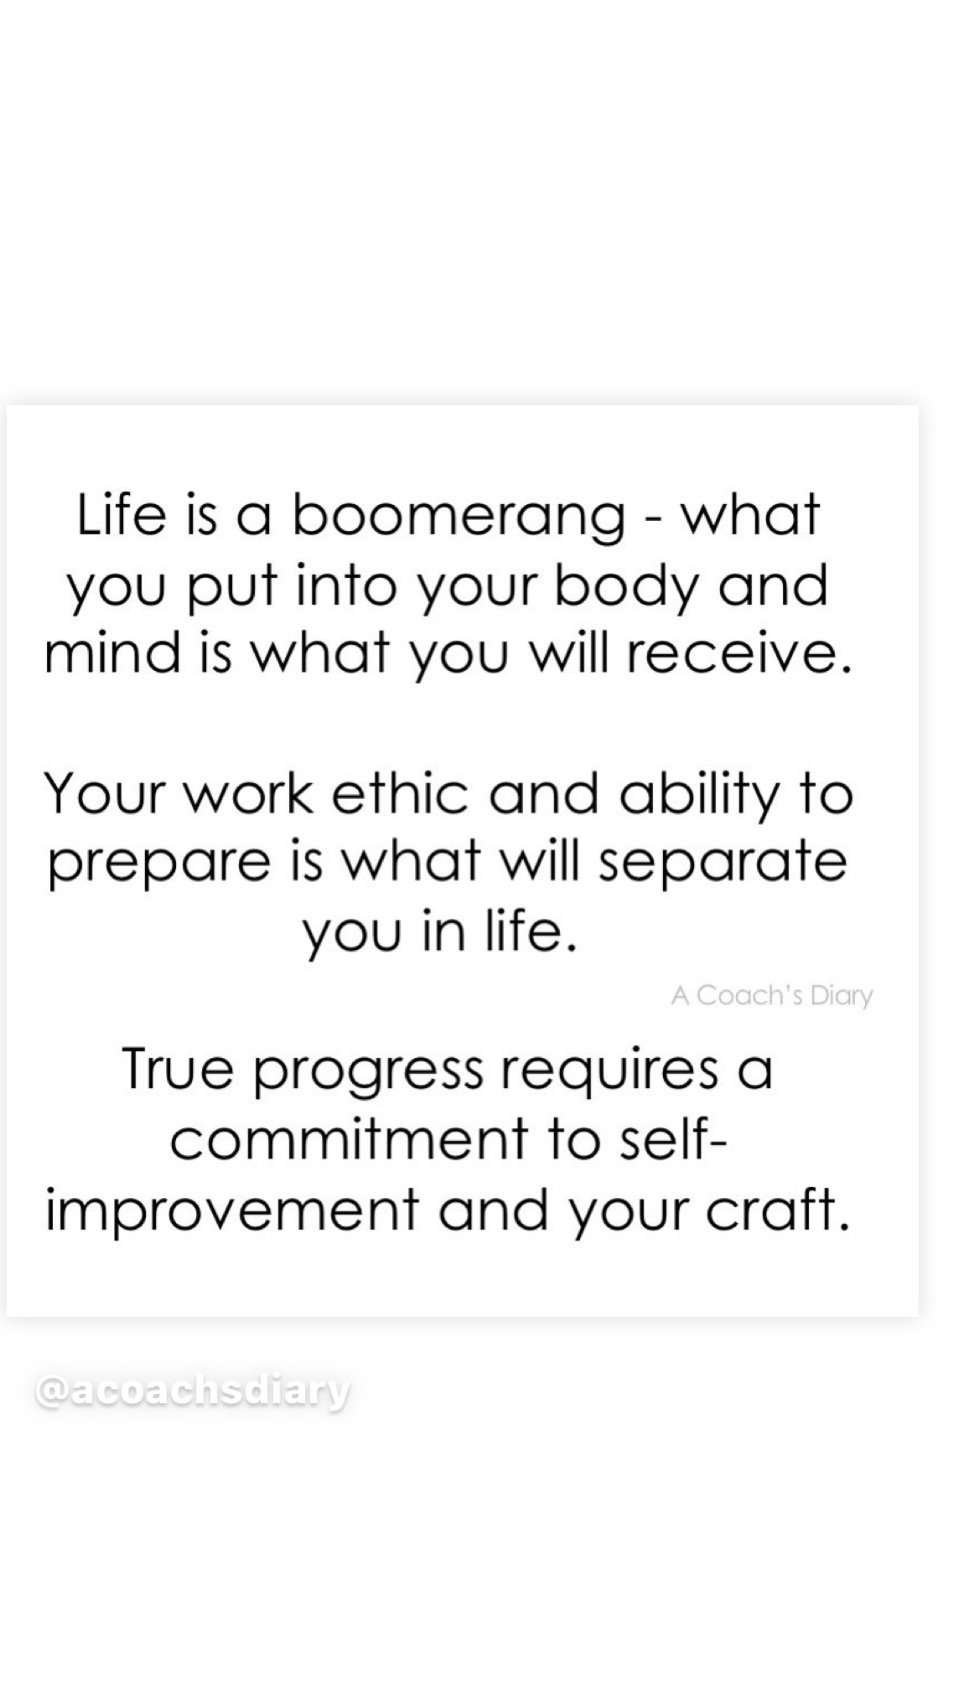 Volleyball inspirational Quotes from A Coach's Diary - Life is a boomerang - what you put into your body and mind is what you will receive

Your work ethic and ability to prepare is what will separate you in life.

True progress requires a commitment to self-improvement and your craft.